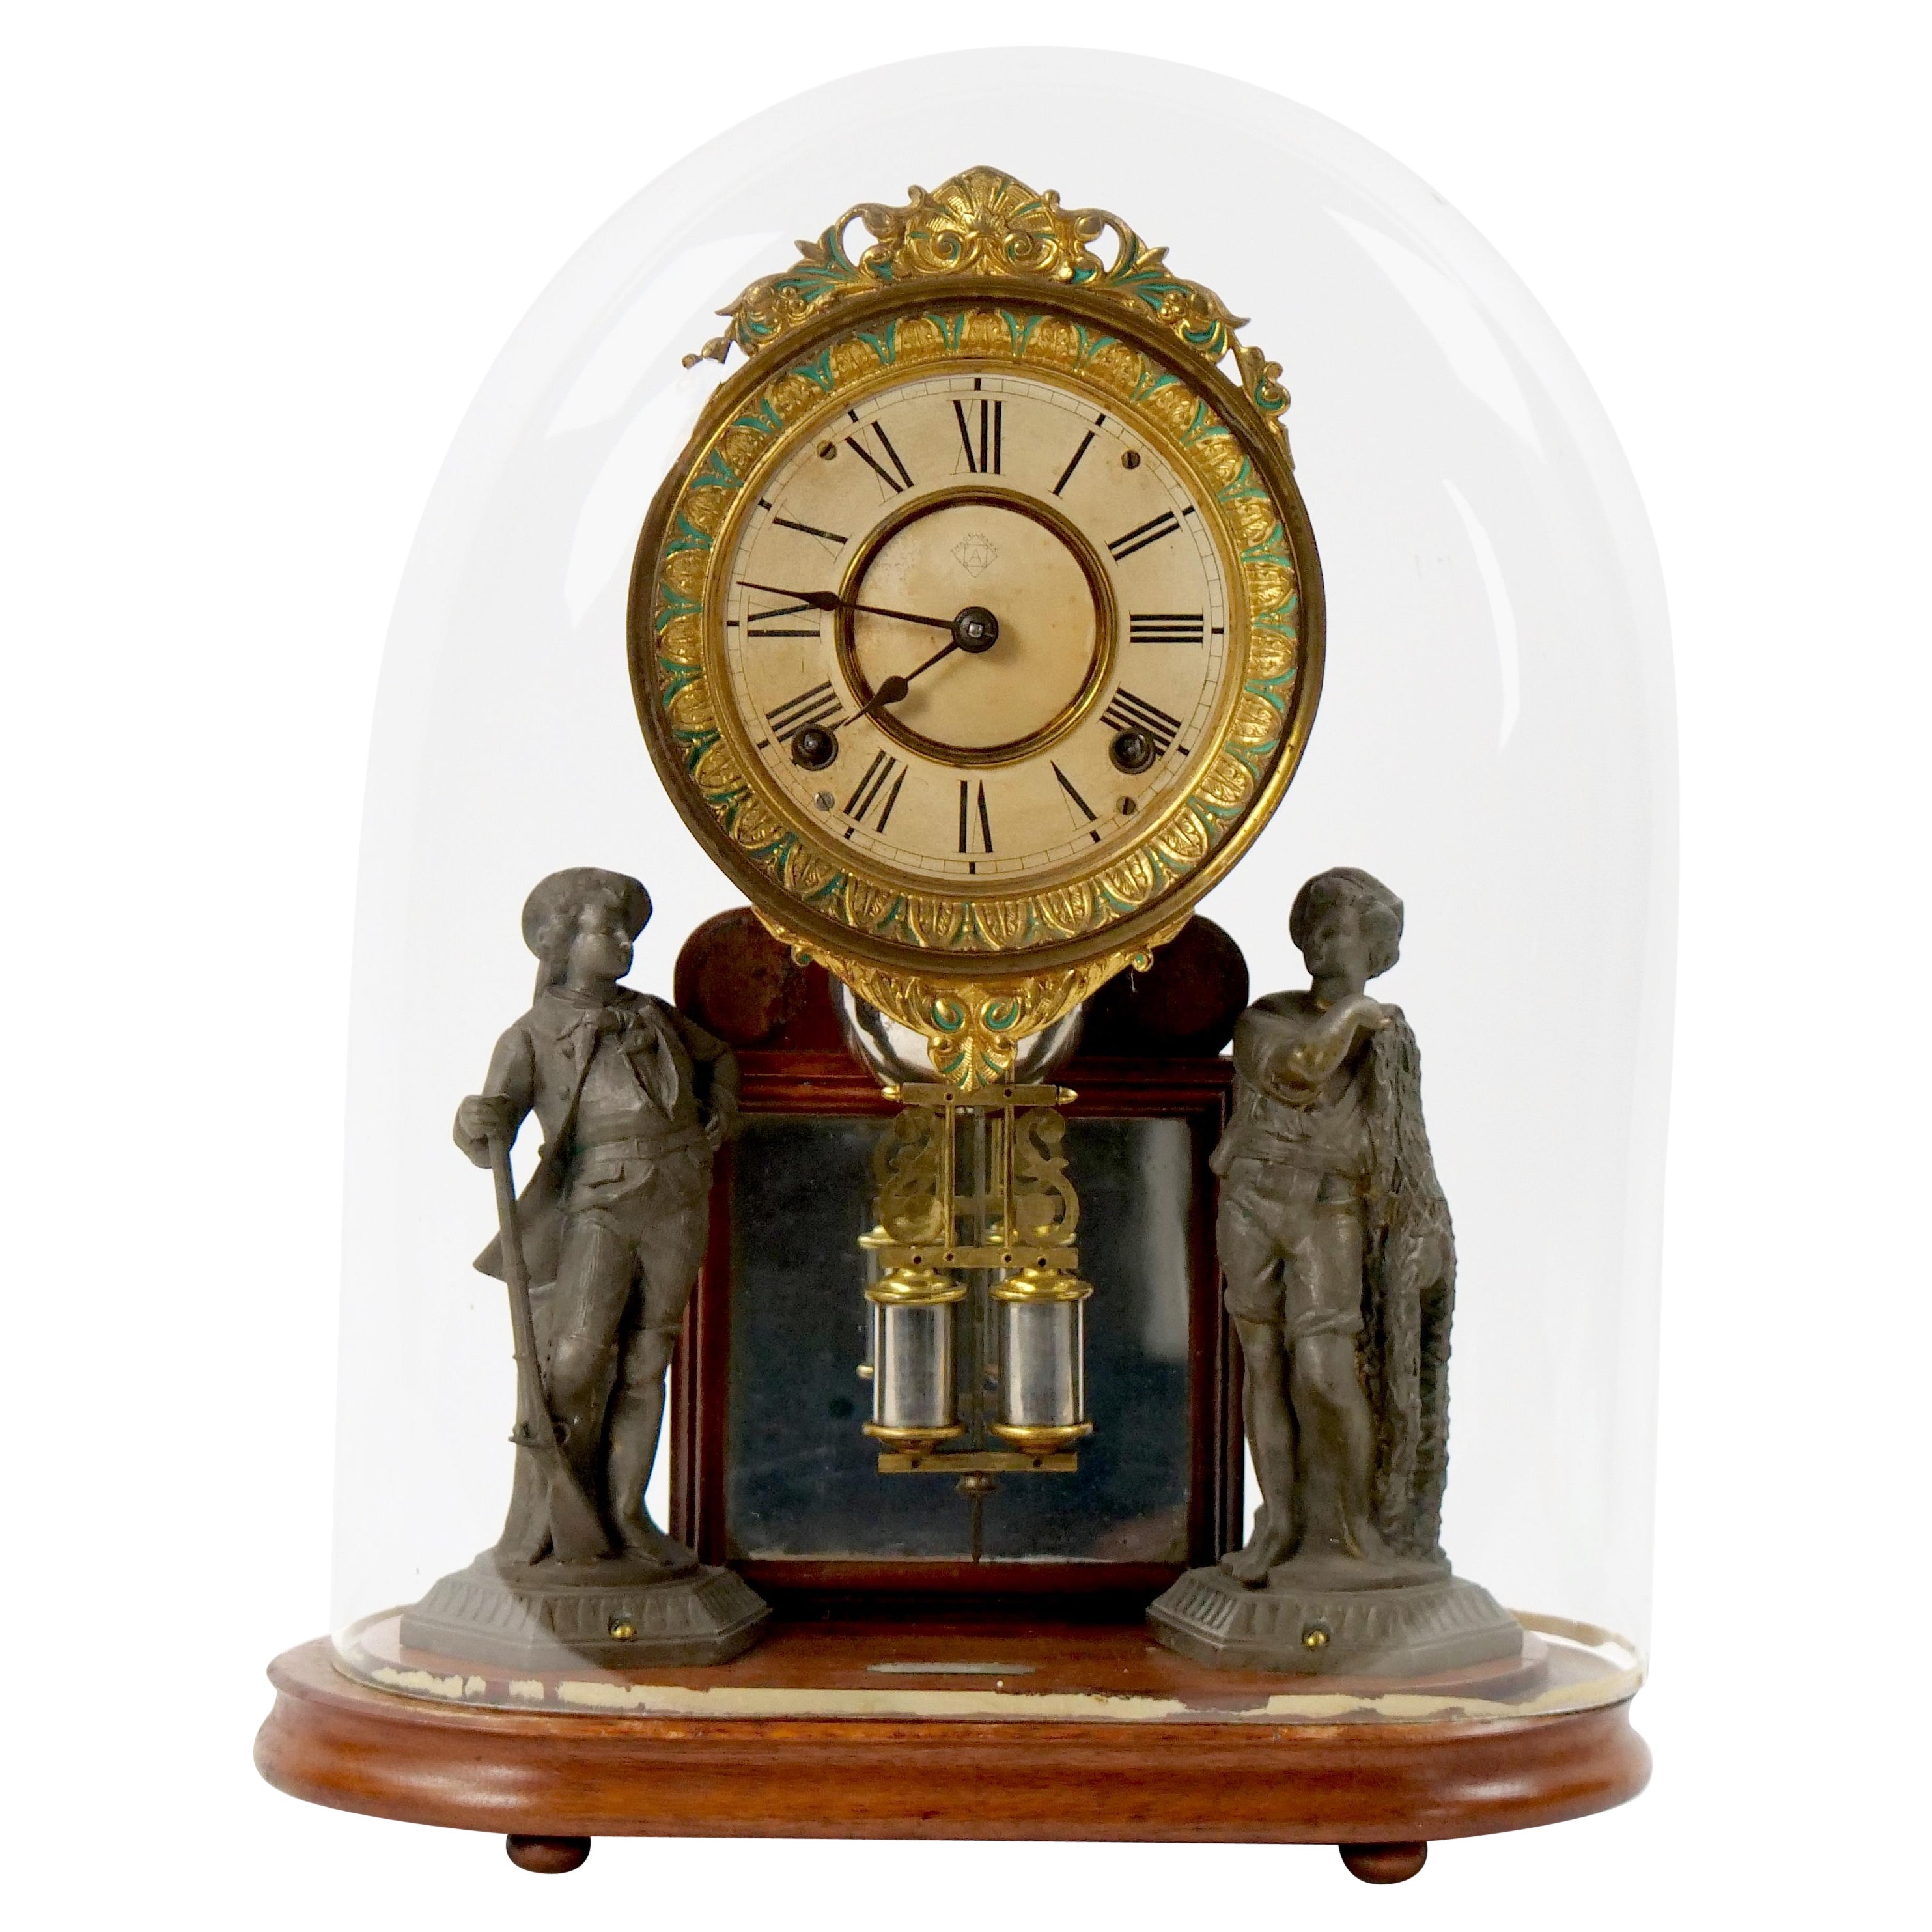 What is the glass cover of a clock called?